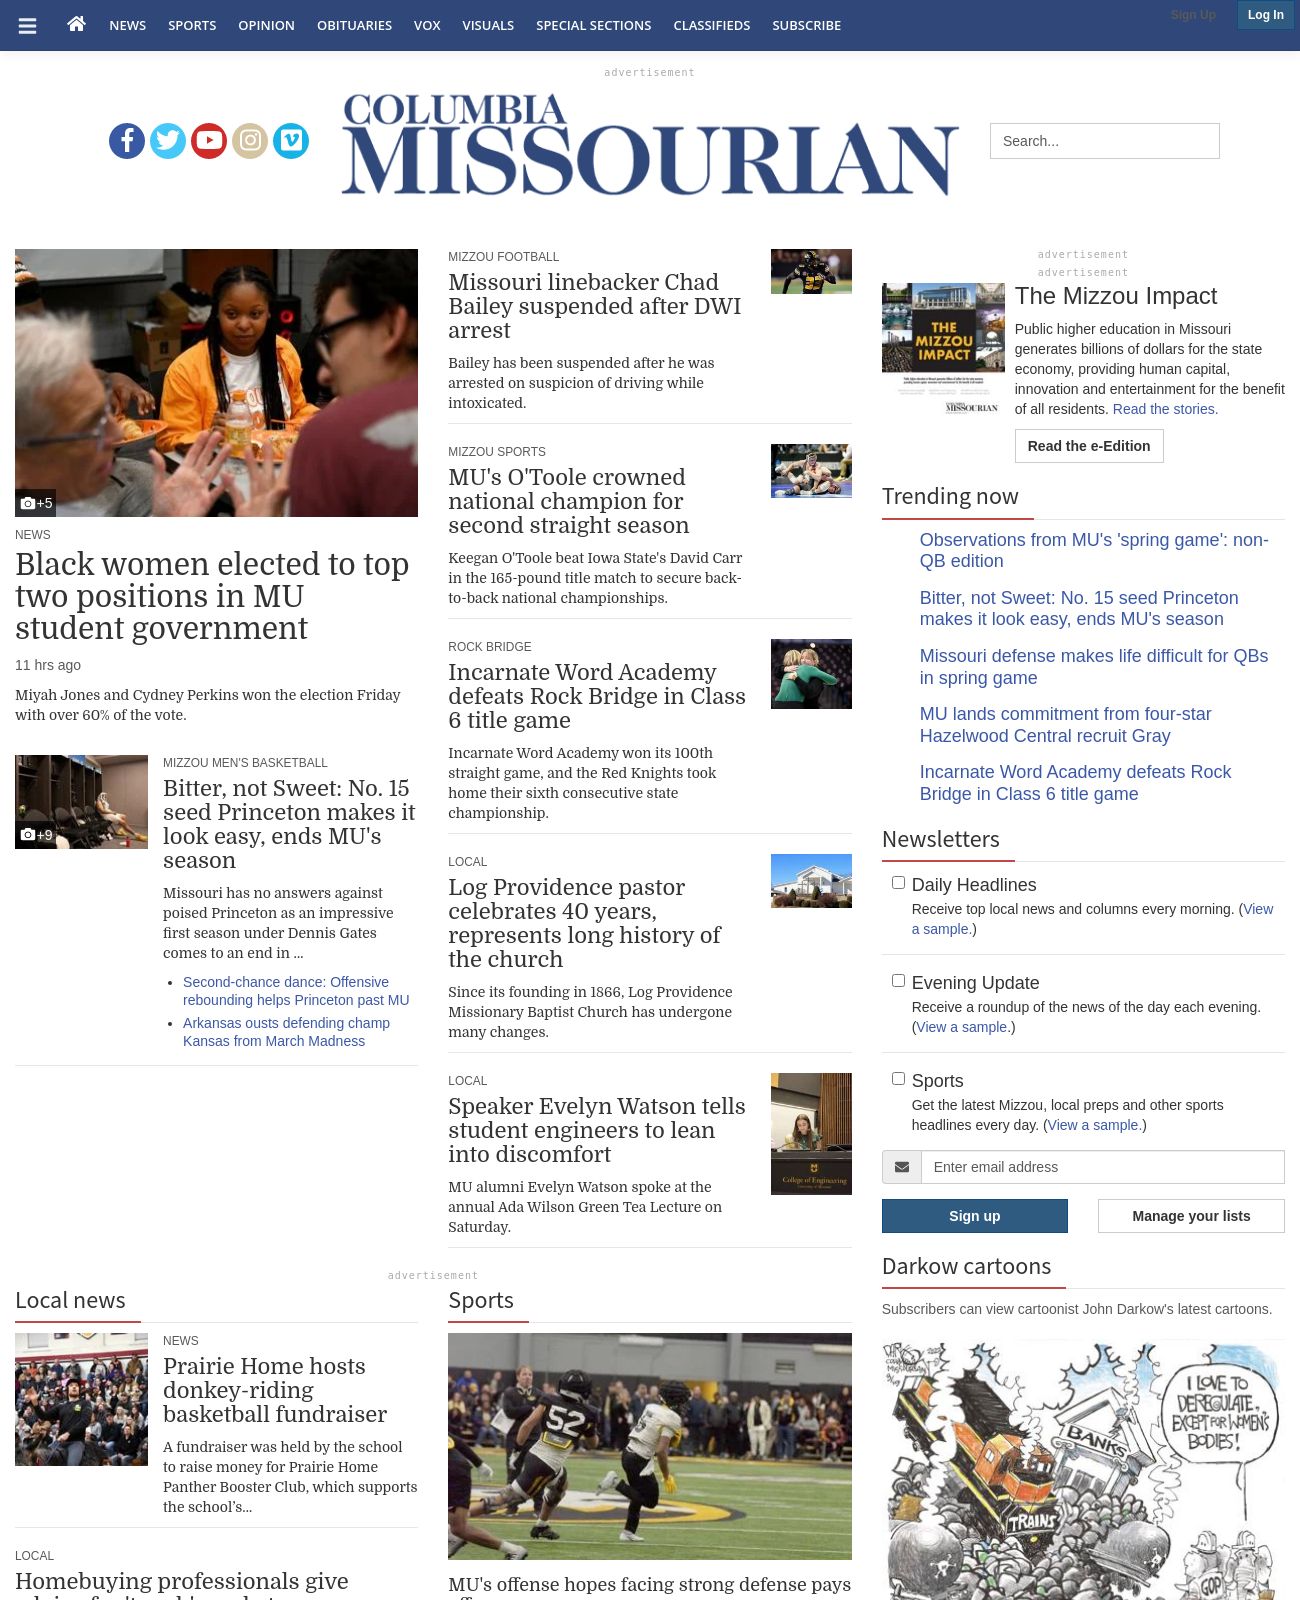 Columbia Missourian at 2023-03-19 17:37:10-05:00 local time